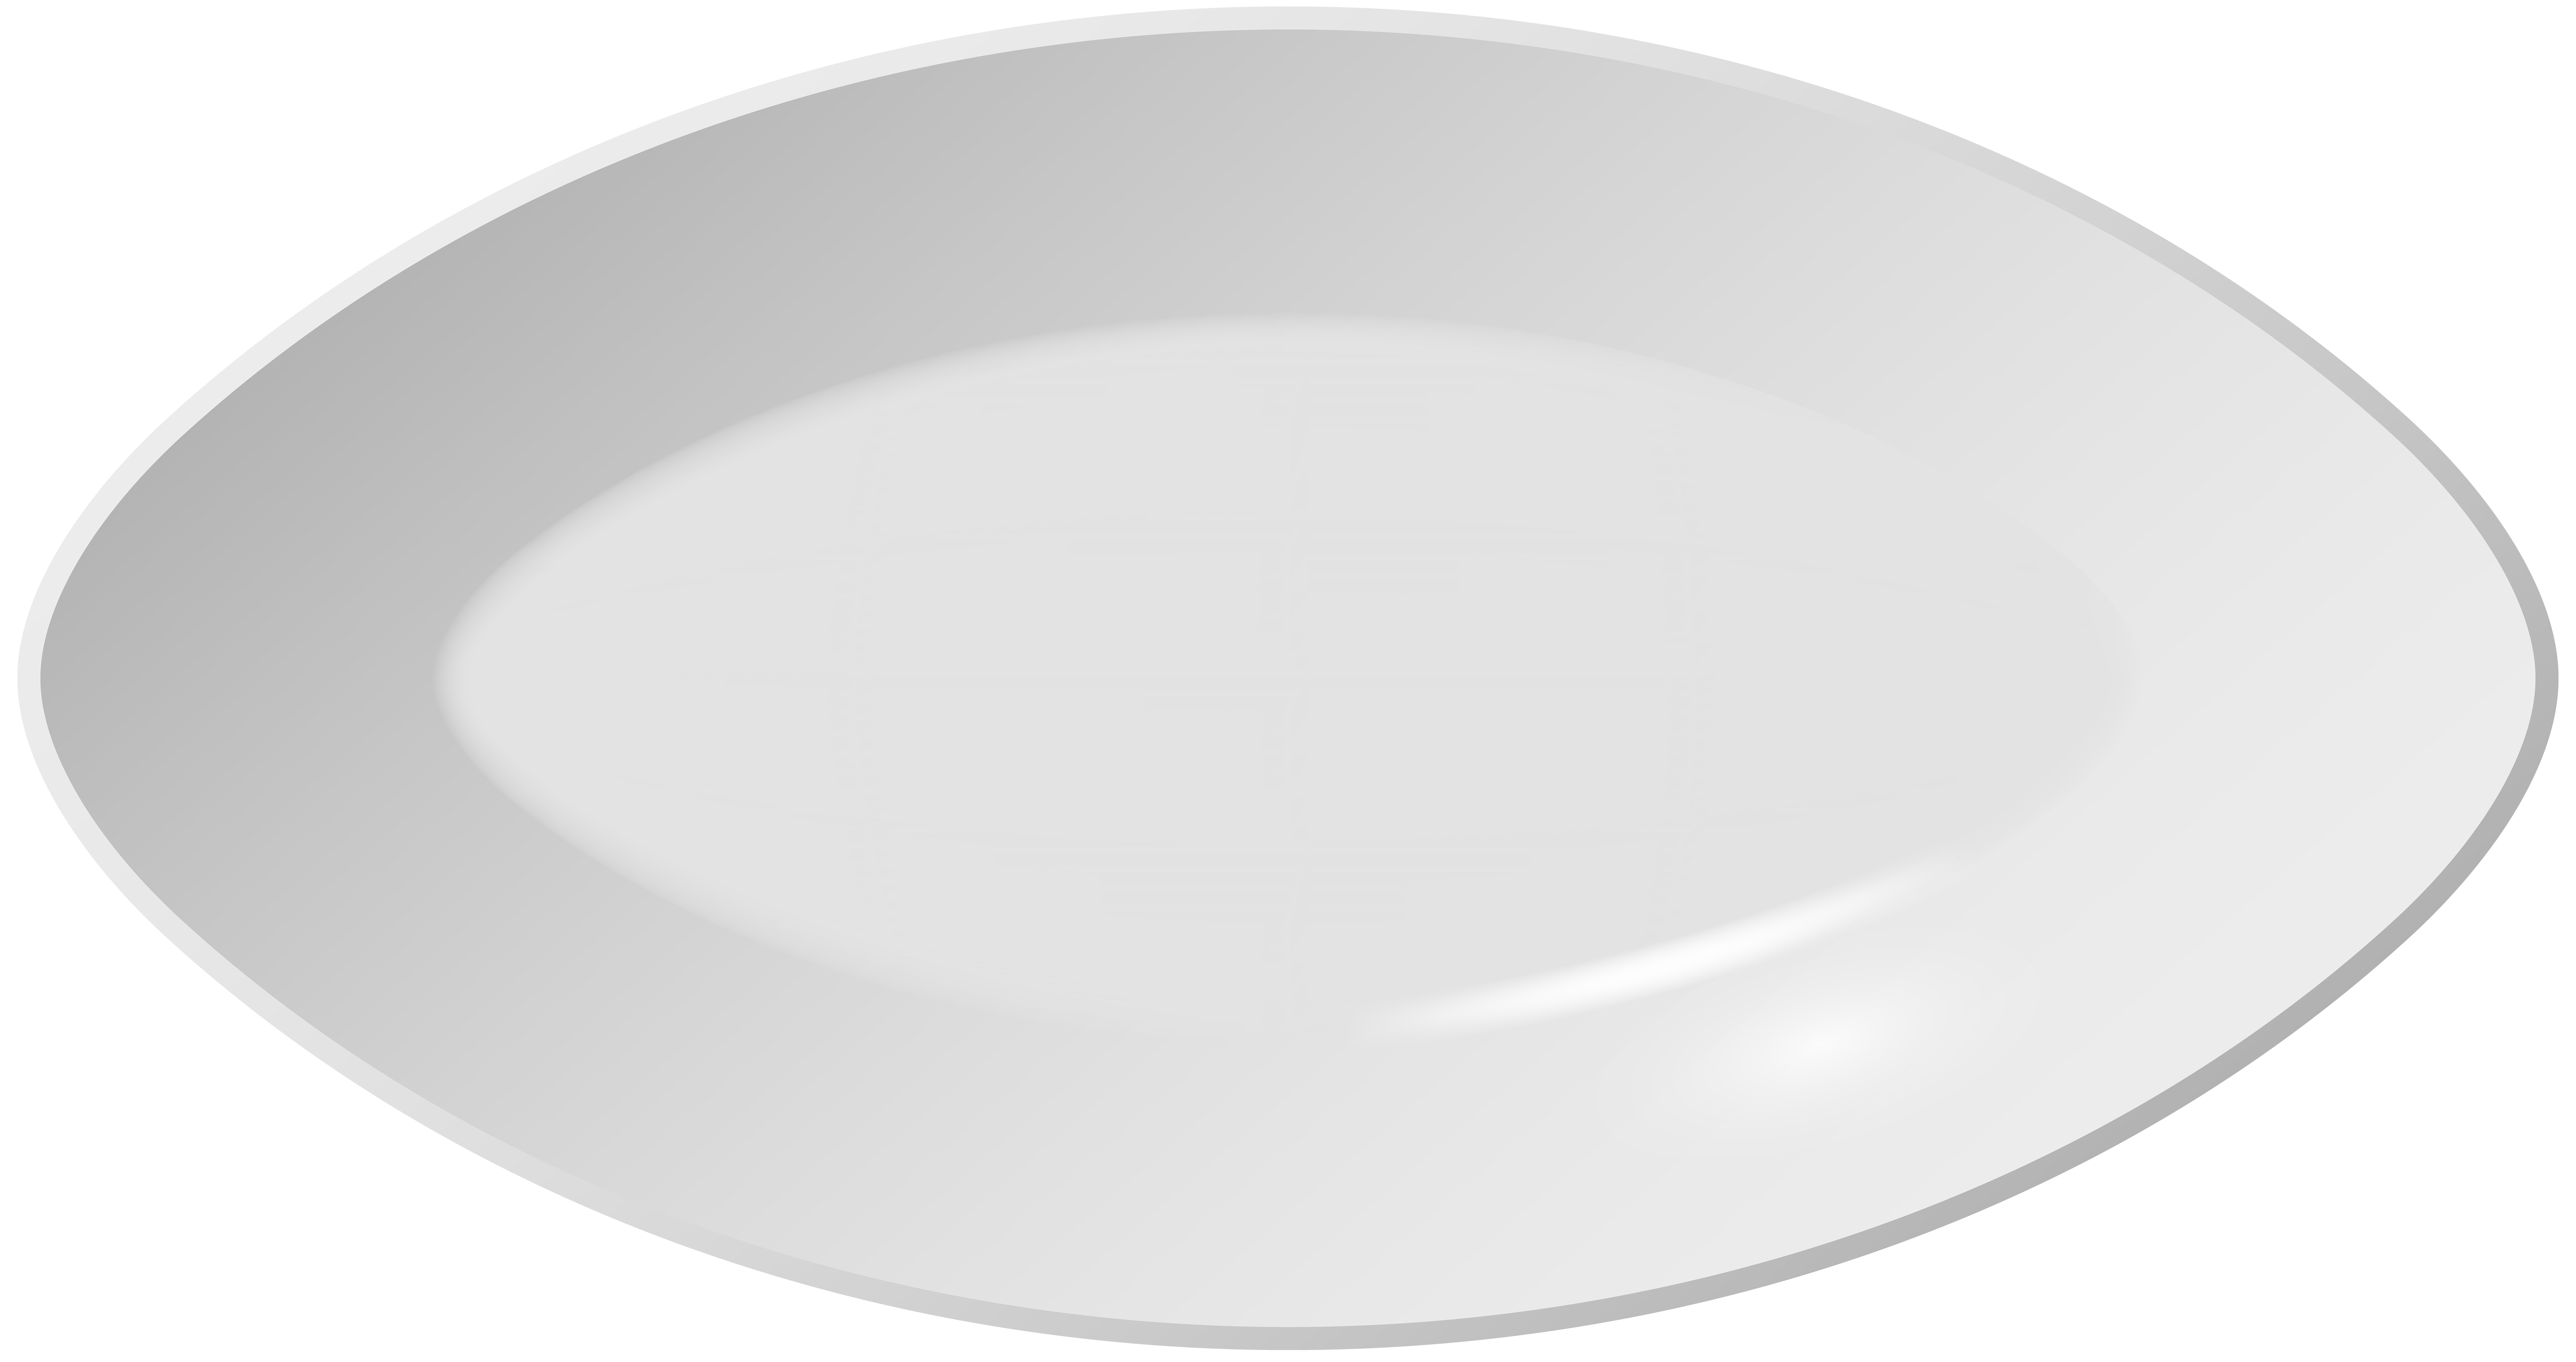 Dinner Plate Png